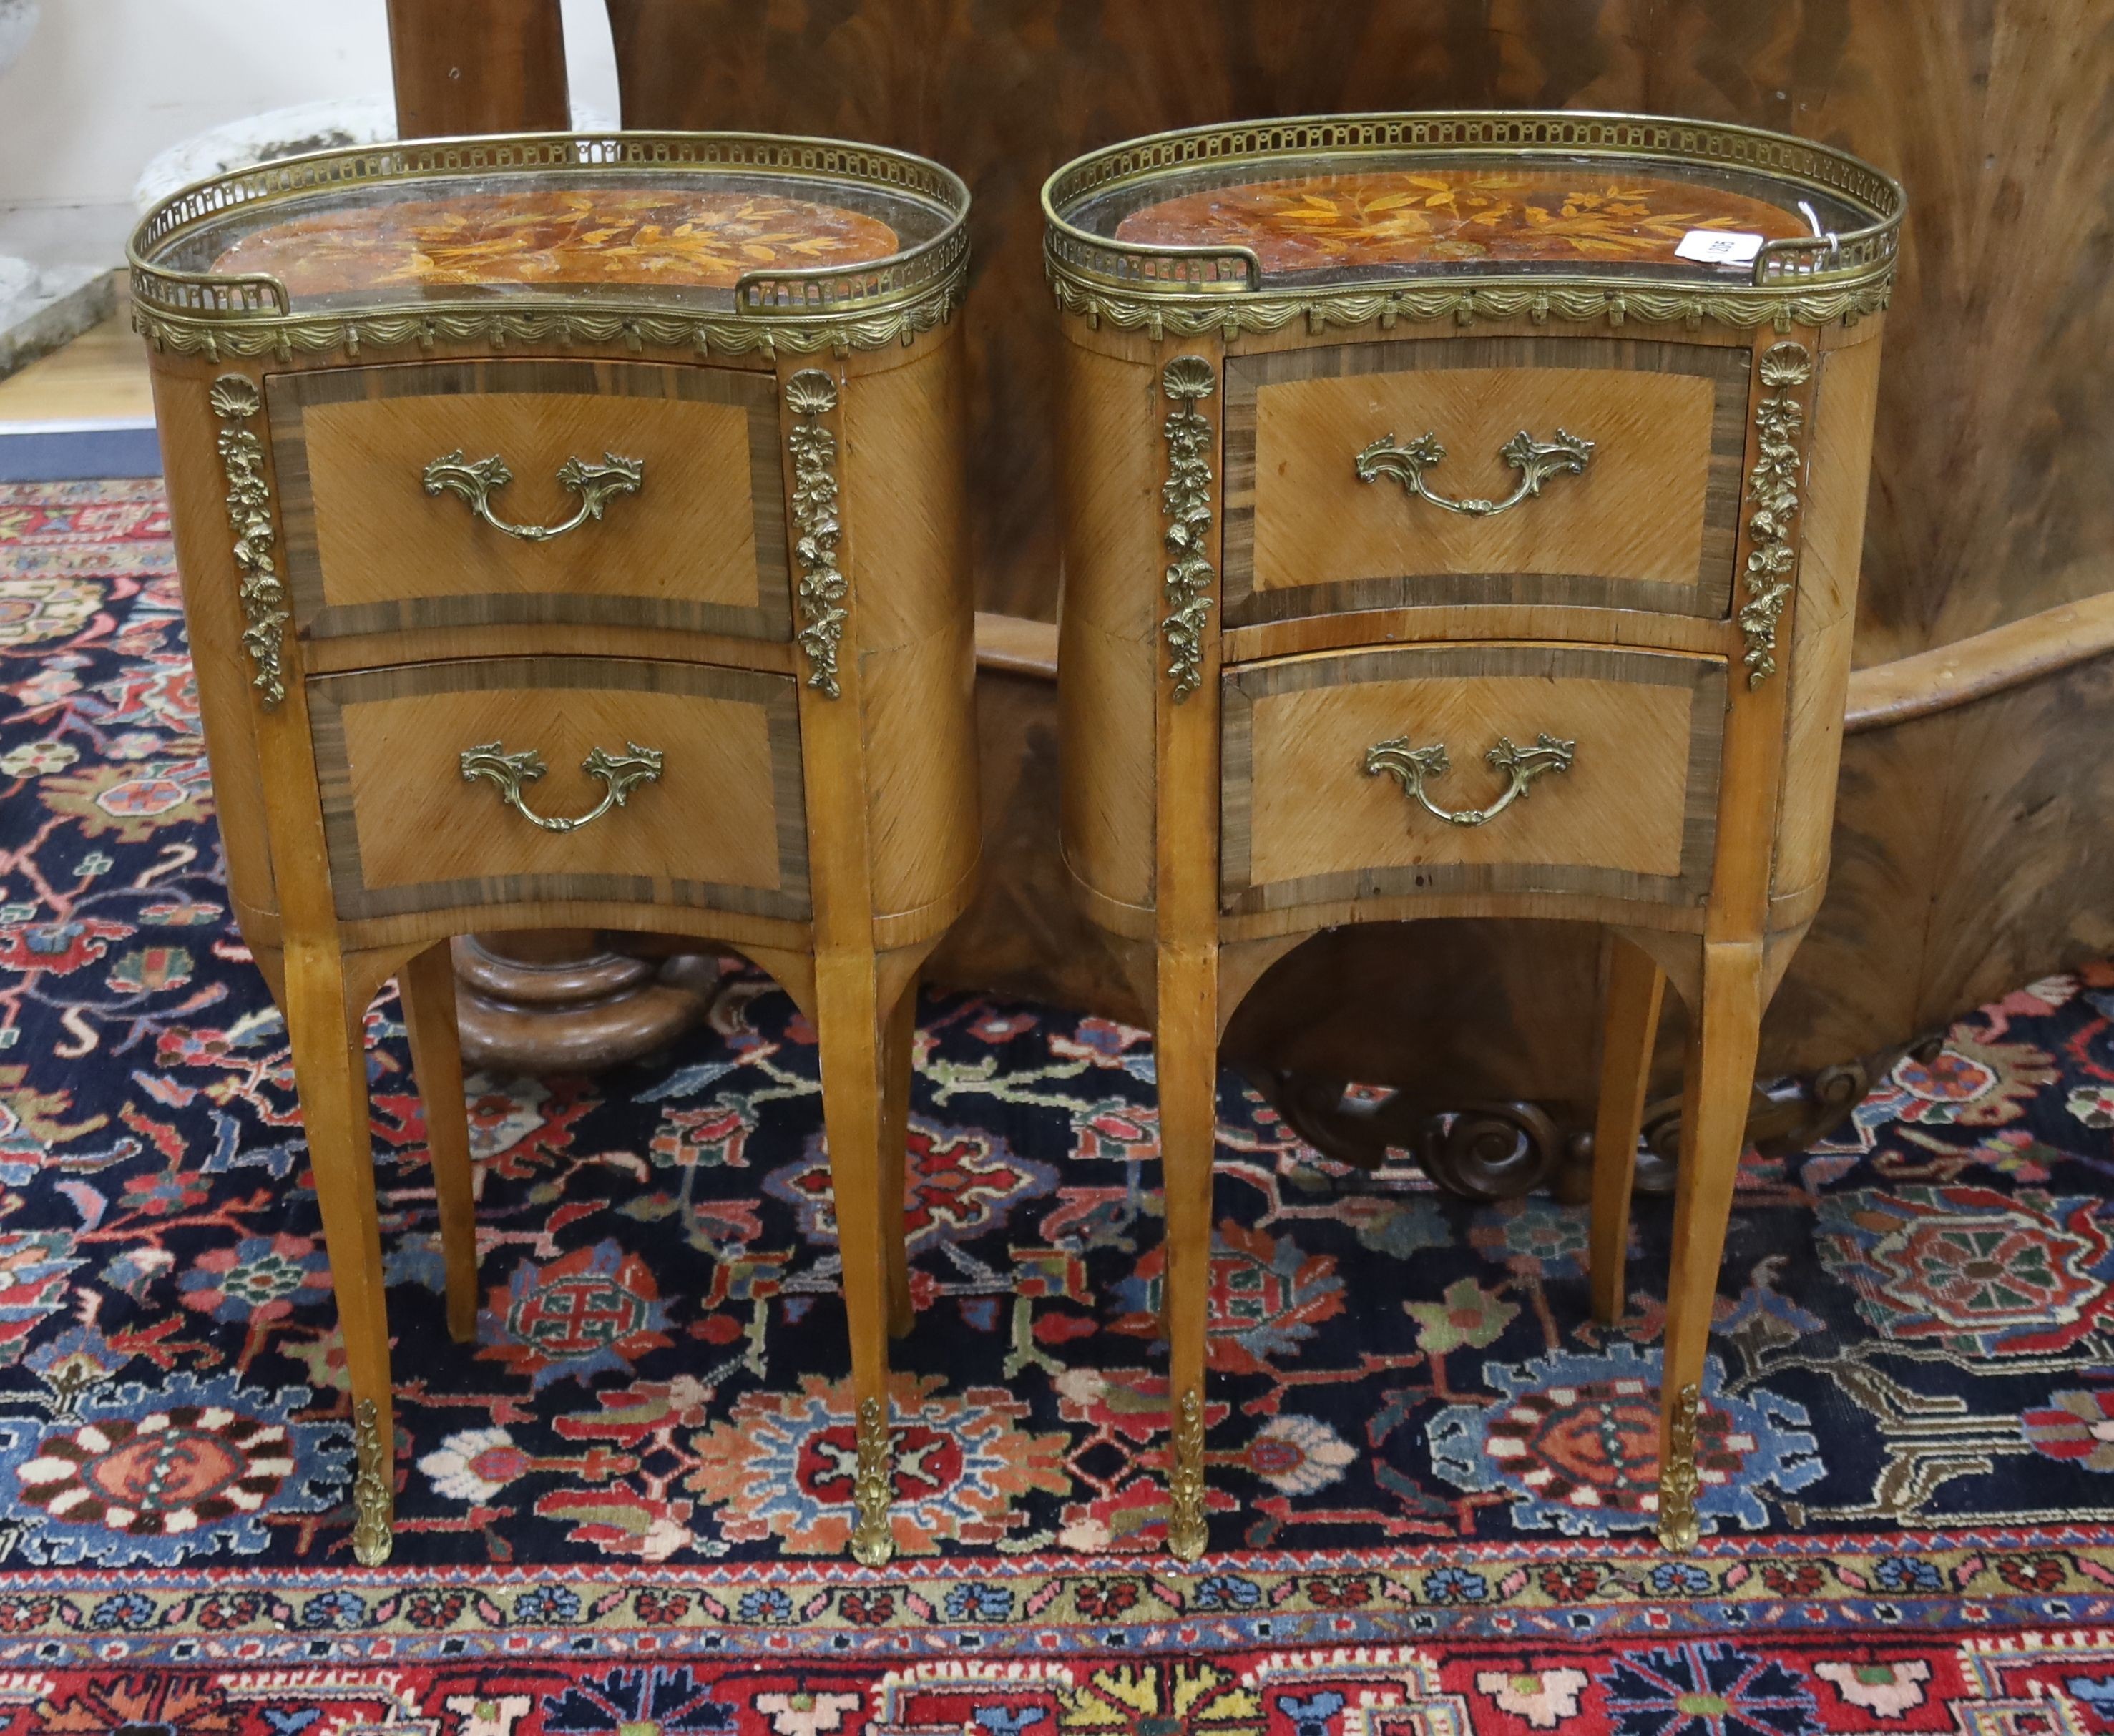 A pair of French marquetry inlaid gilt metal mounted kidney shaped two drawer bedside cabinets,